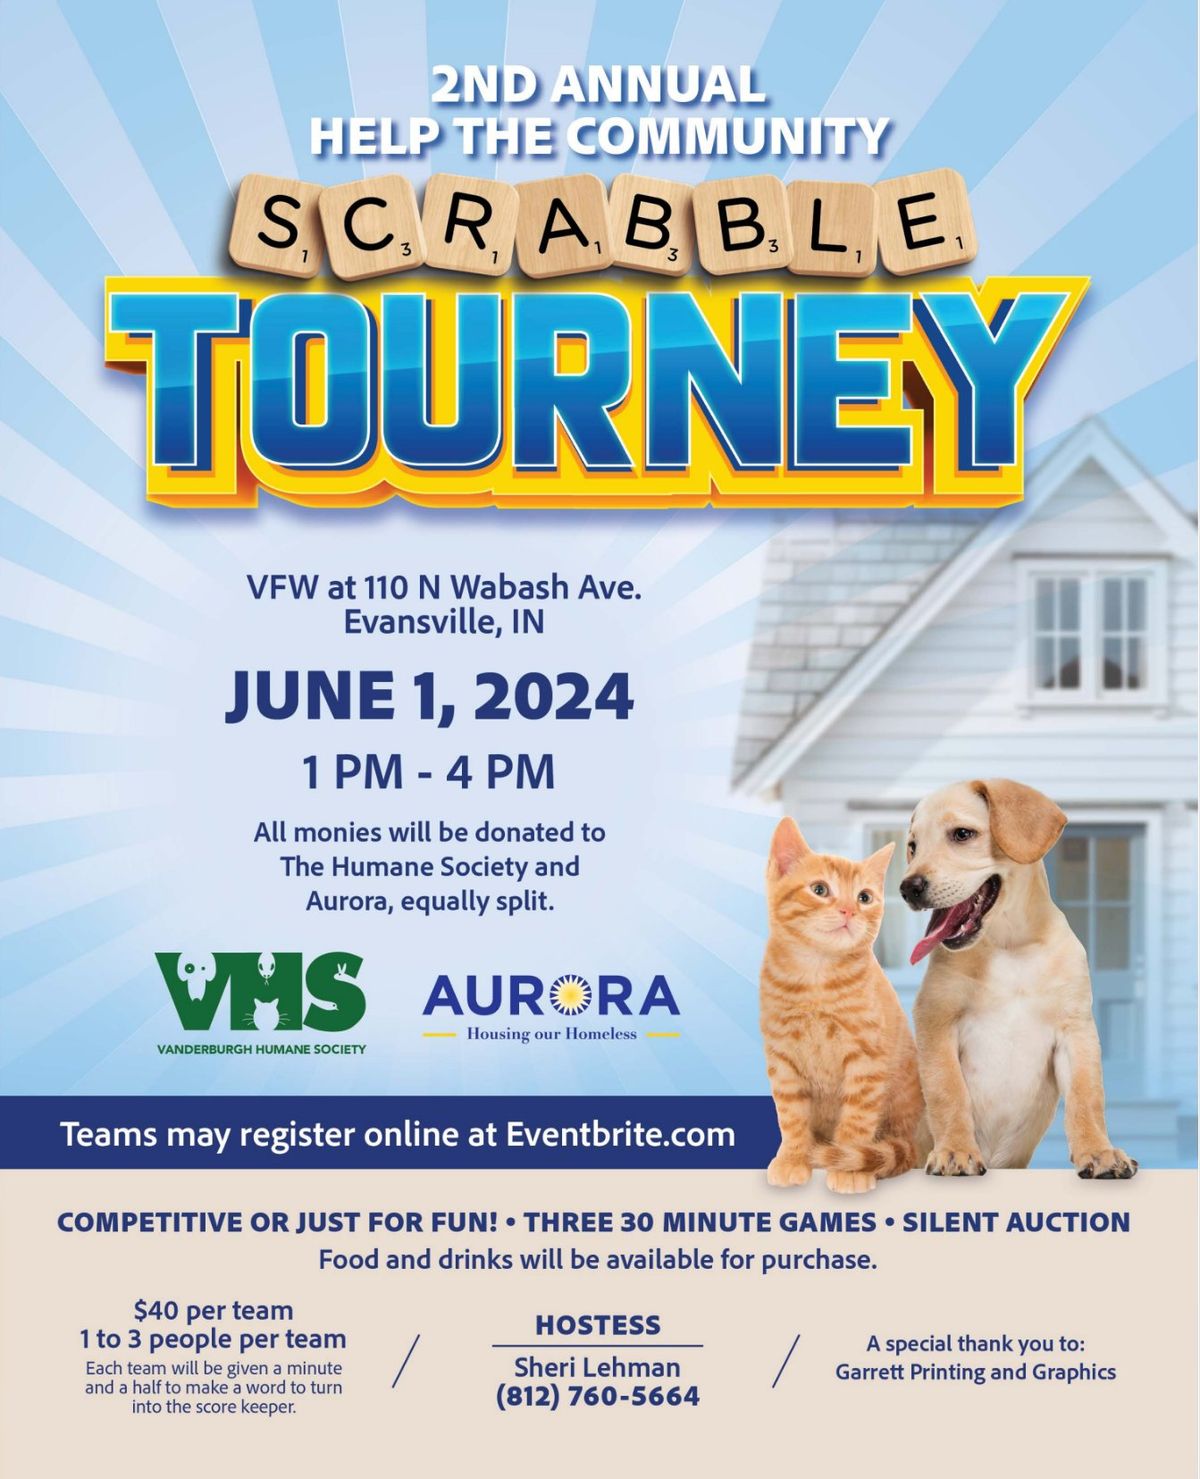 2nd Annual Help the Community Scrabble Tourney